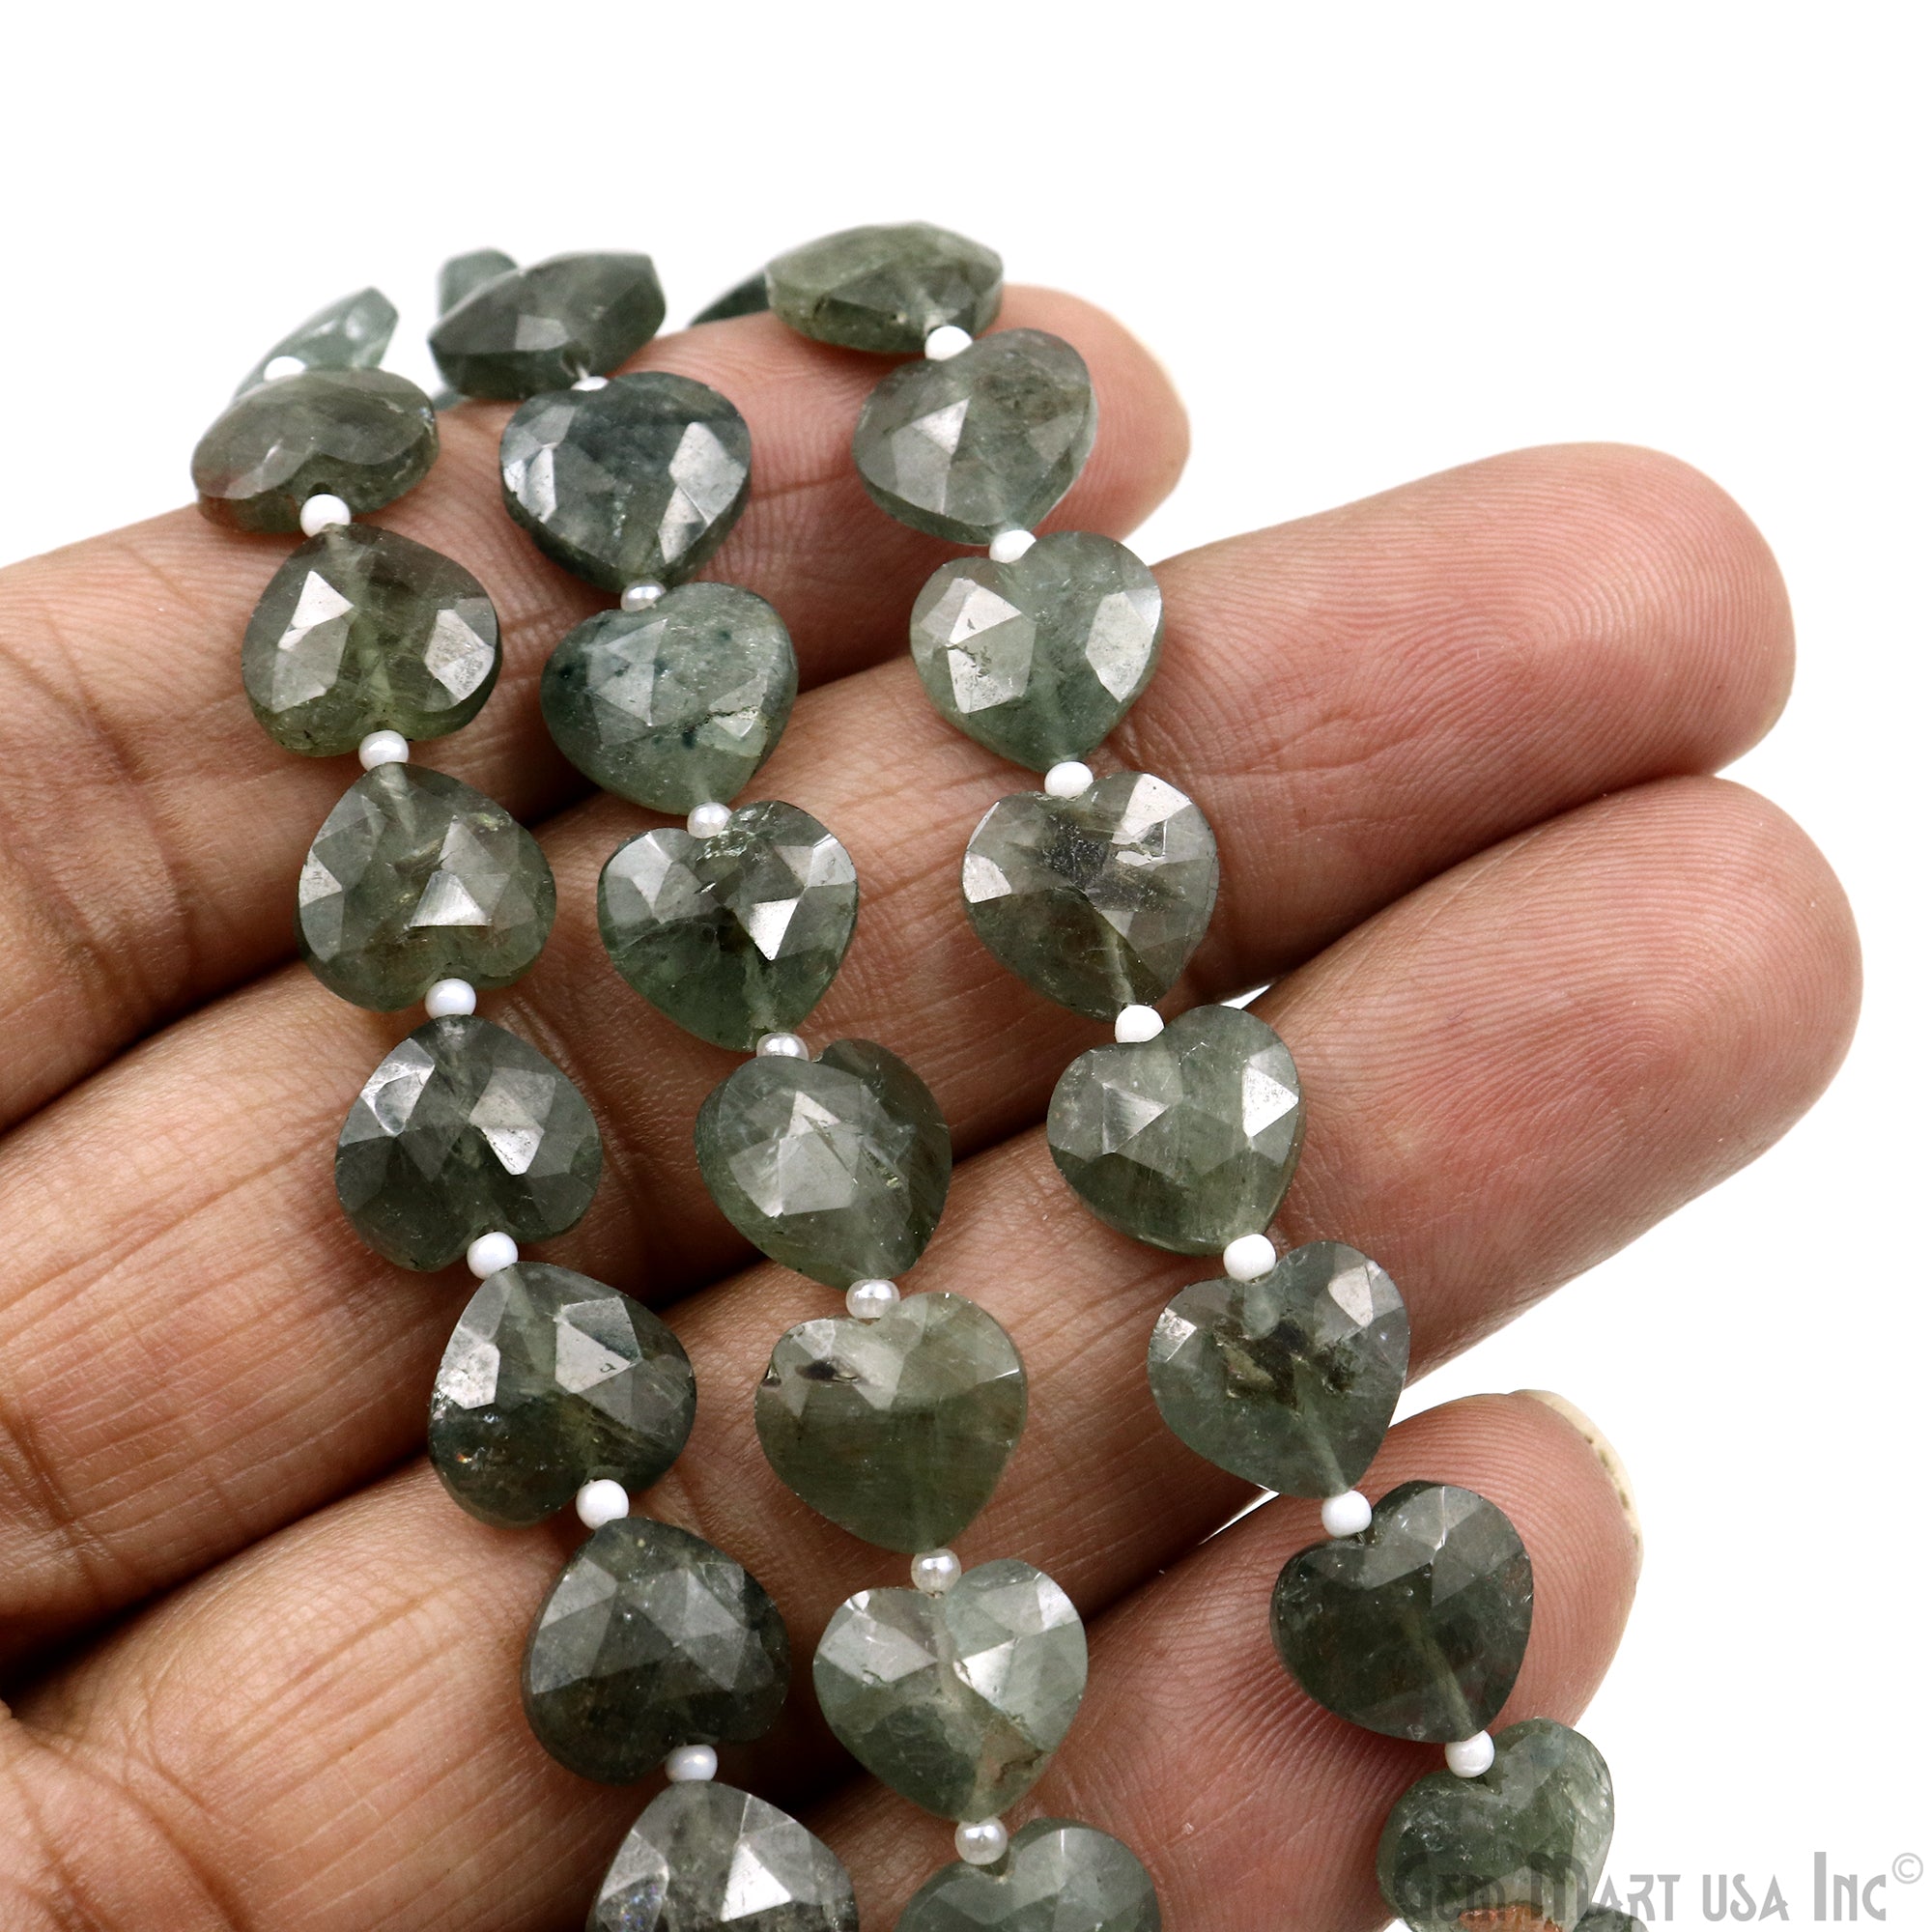 Green Apatite Faceted Heart Shape 10mm Beads Gemstone 7 Inch Strands Briolette Drops